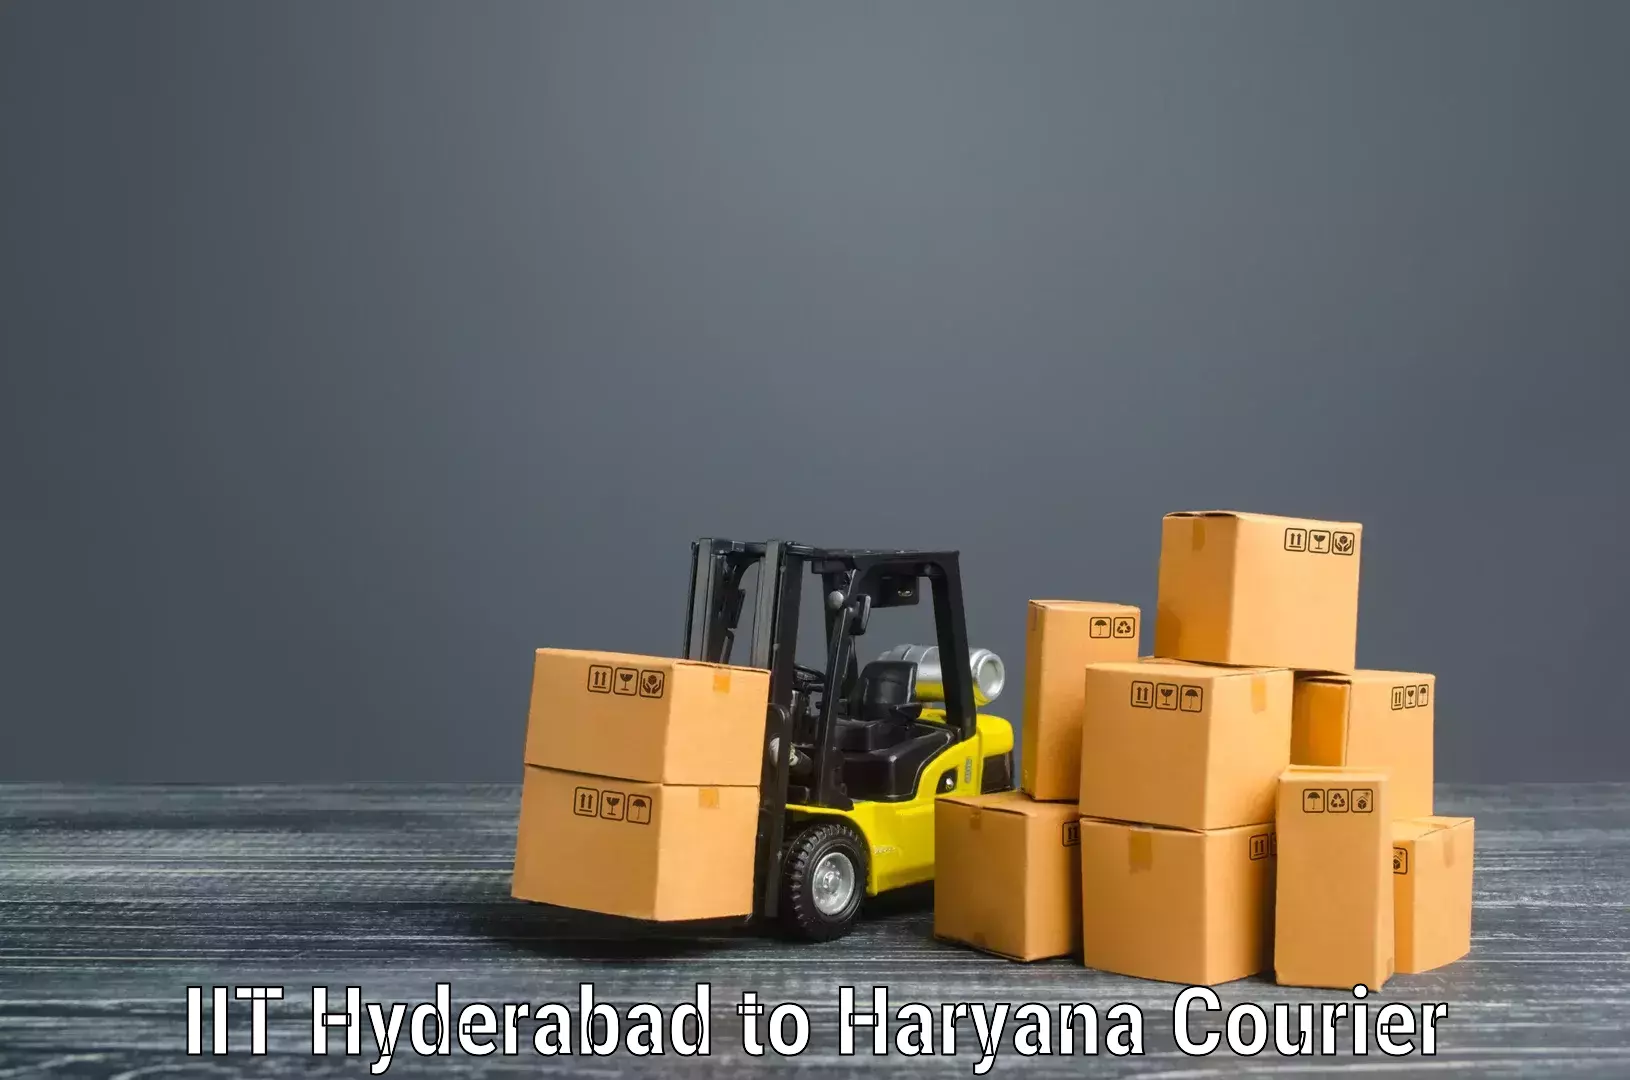 Custom relocation services IIT Hyderabad to NCR Haryana